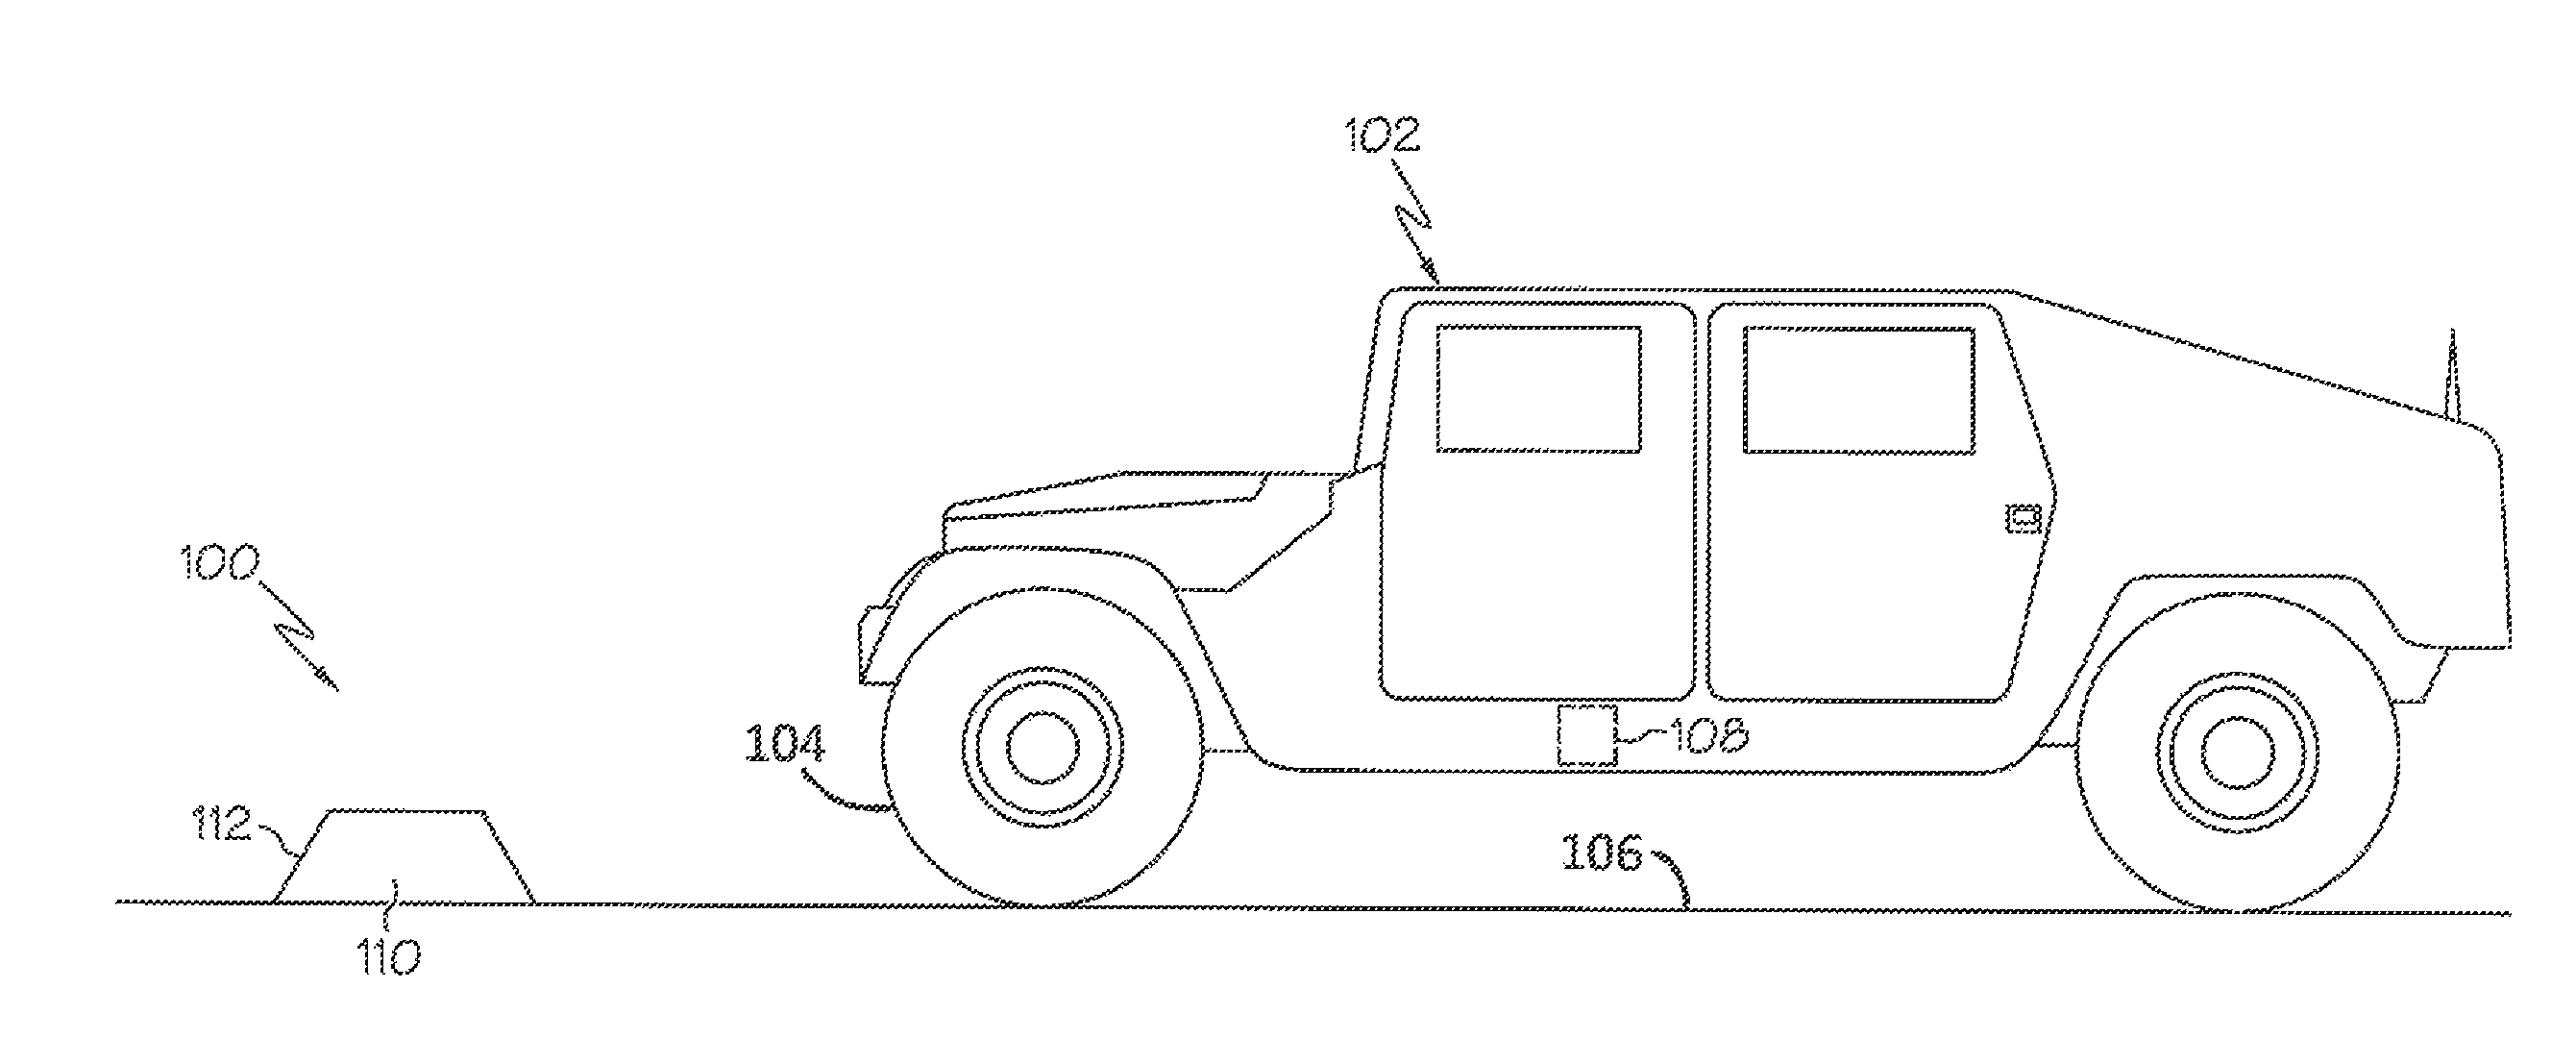 Health monitoring systems and methods with vehicle identification